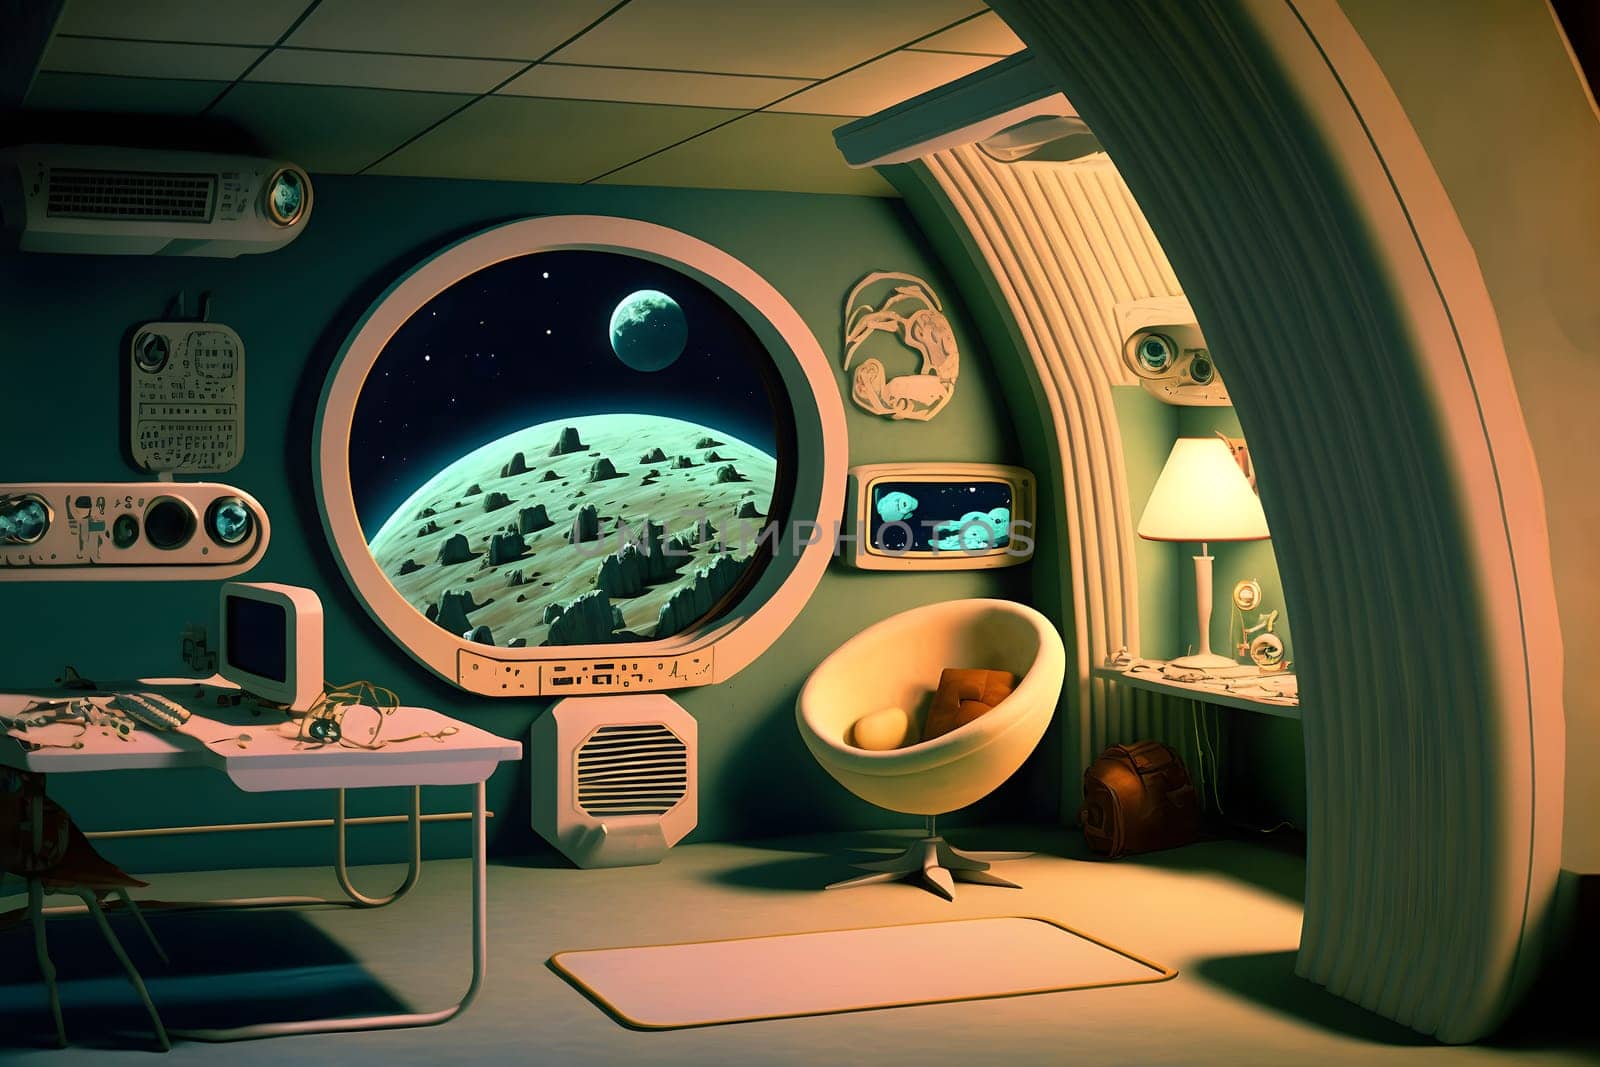 interior of utopian retrofuturistic moonbase, neural network generated art. Digitally generated image. Not based on any actual person, scene or pattern.